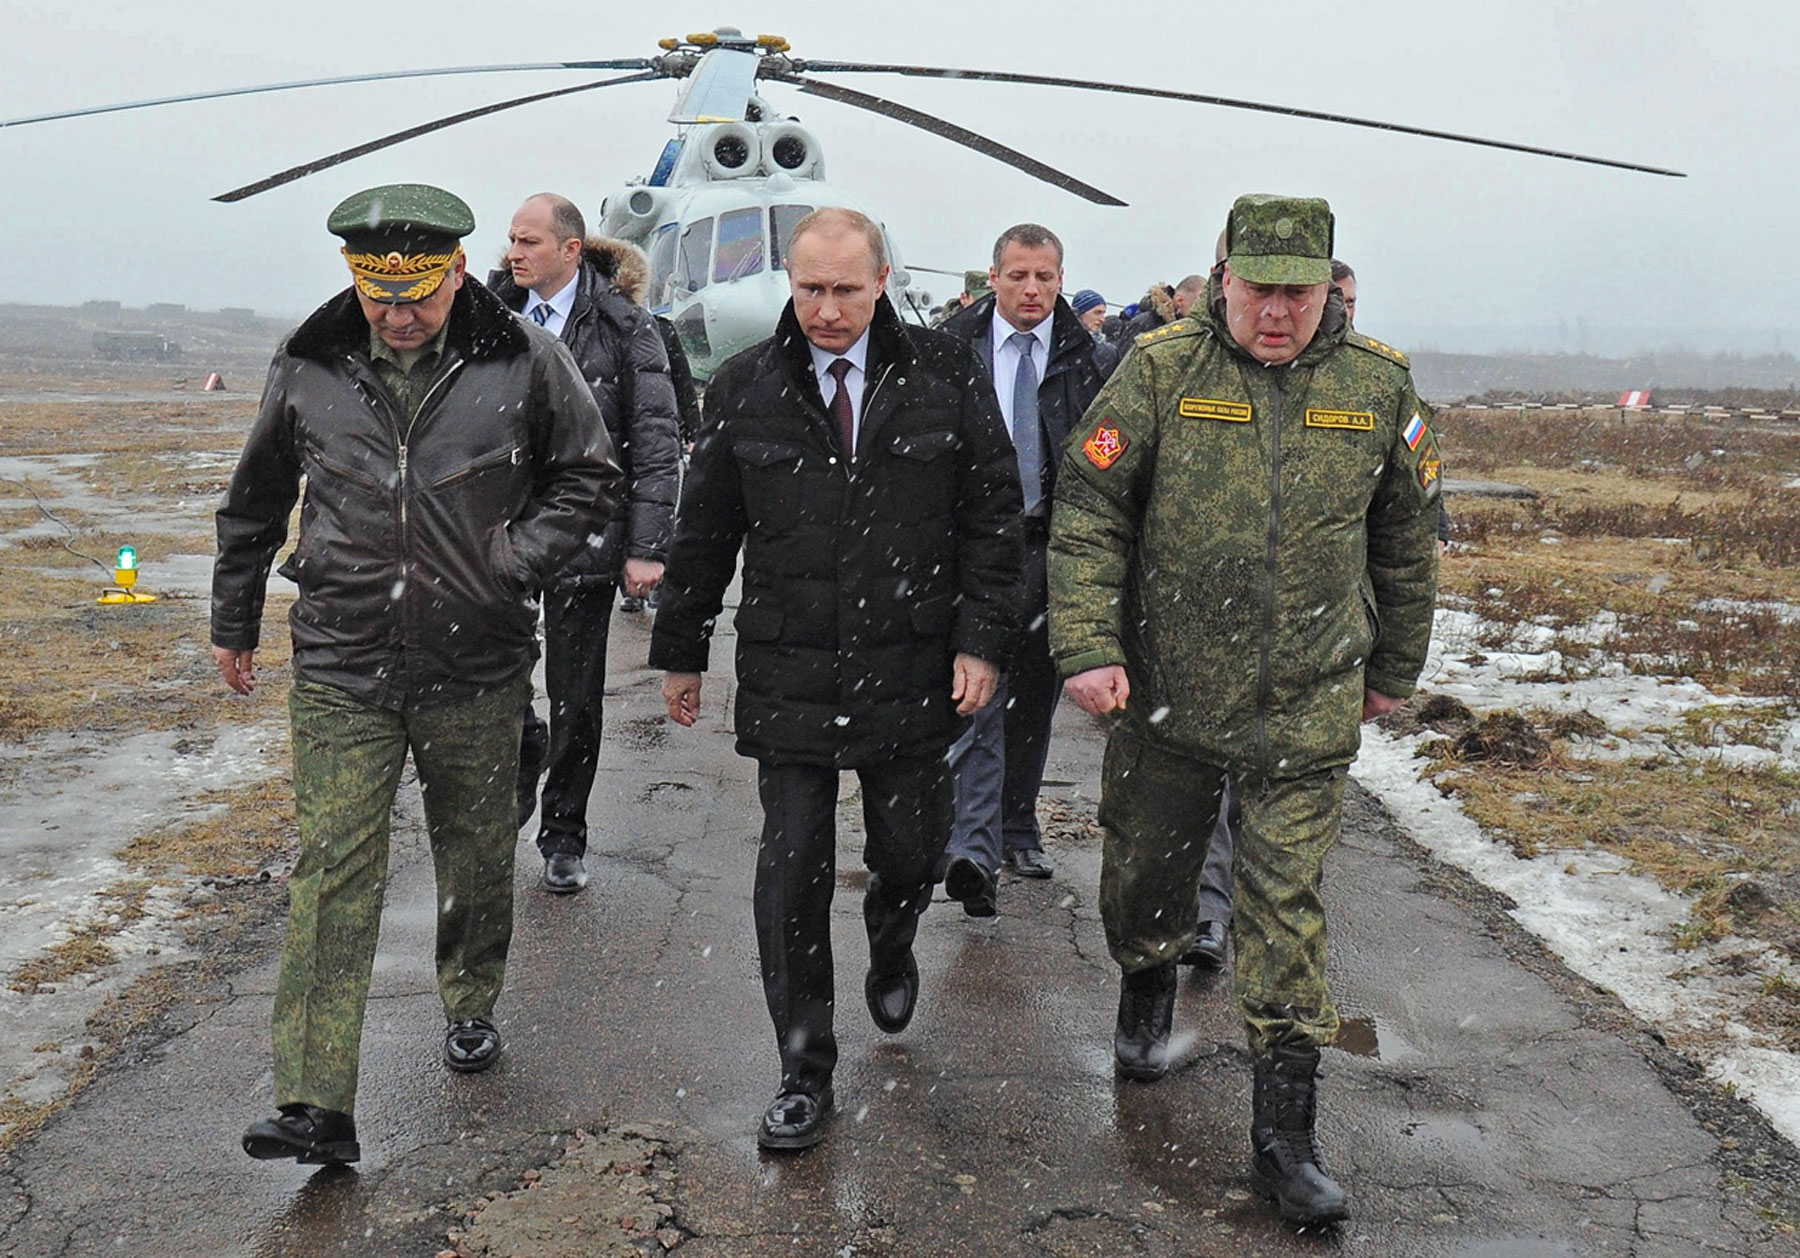 From left: Russia's defence minister Sergei Shoigu, president Vladimir Putin, and commander of the Russian Western Military District Troops Anatoly Sidorov arrive at the Kirillovsky training ground to watch military exercises on Mar.3, 2014. (Klimentyev Mikhail—ITAR-TASS/Landov)